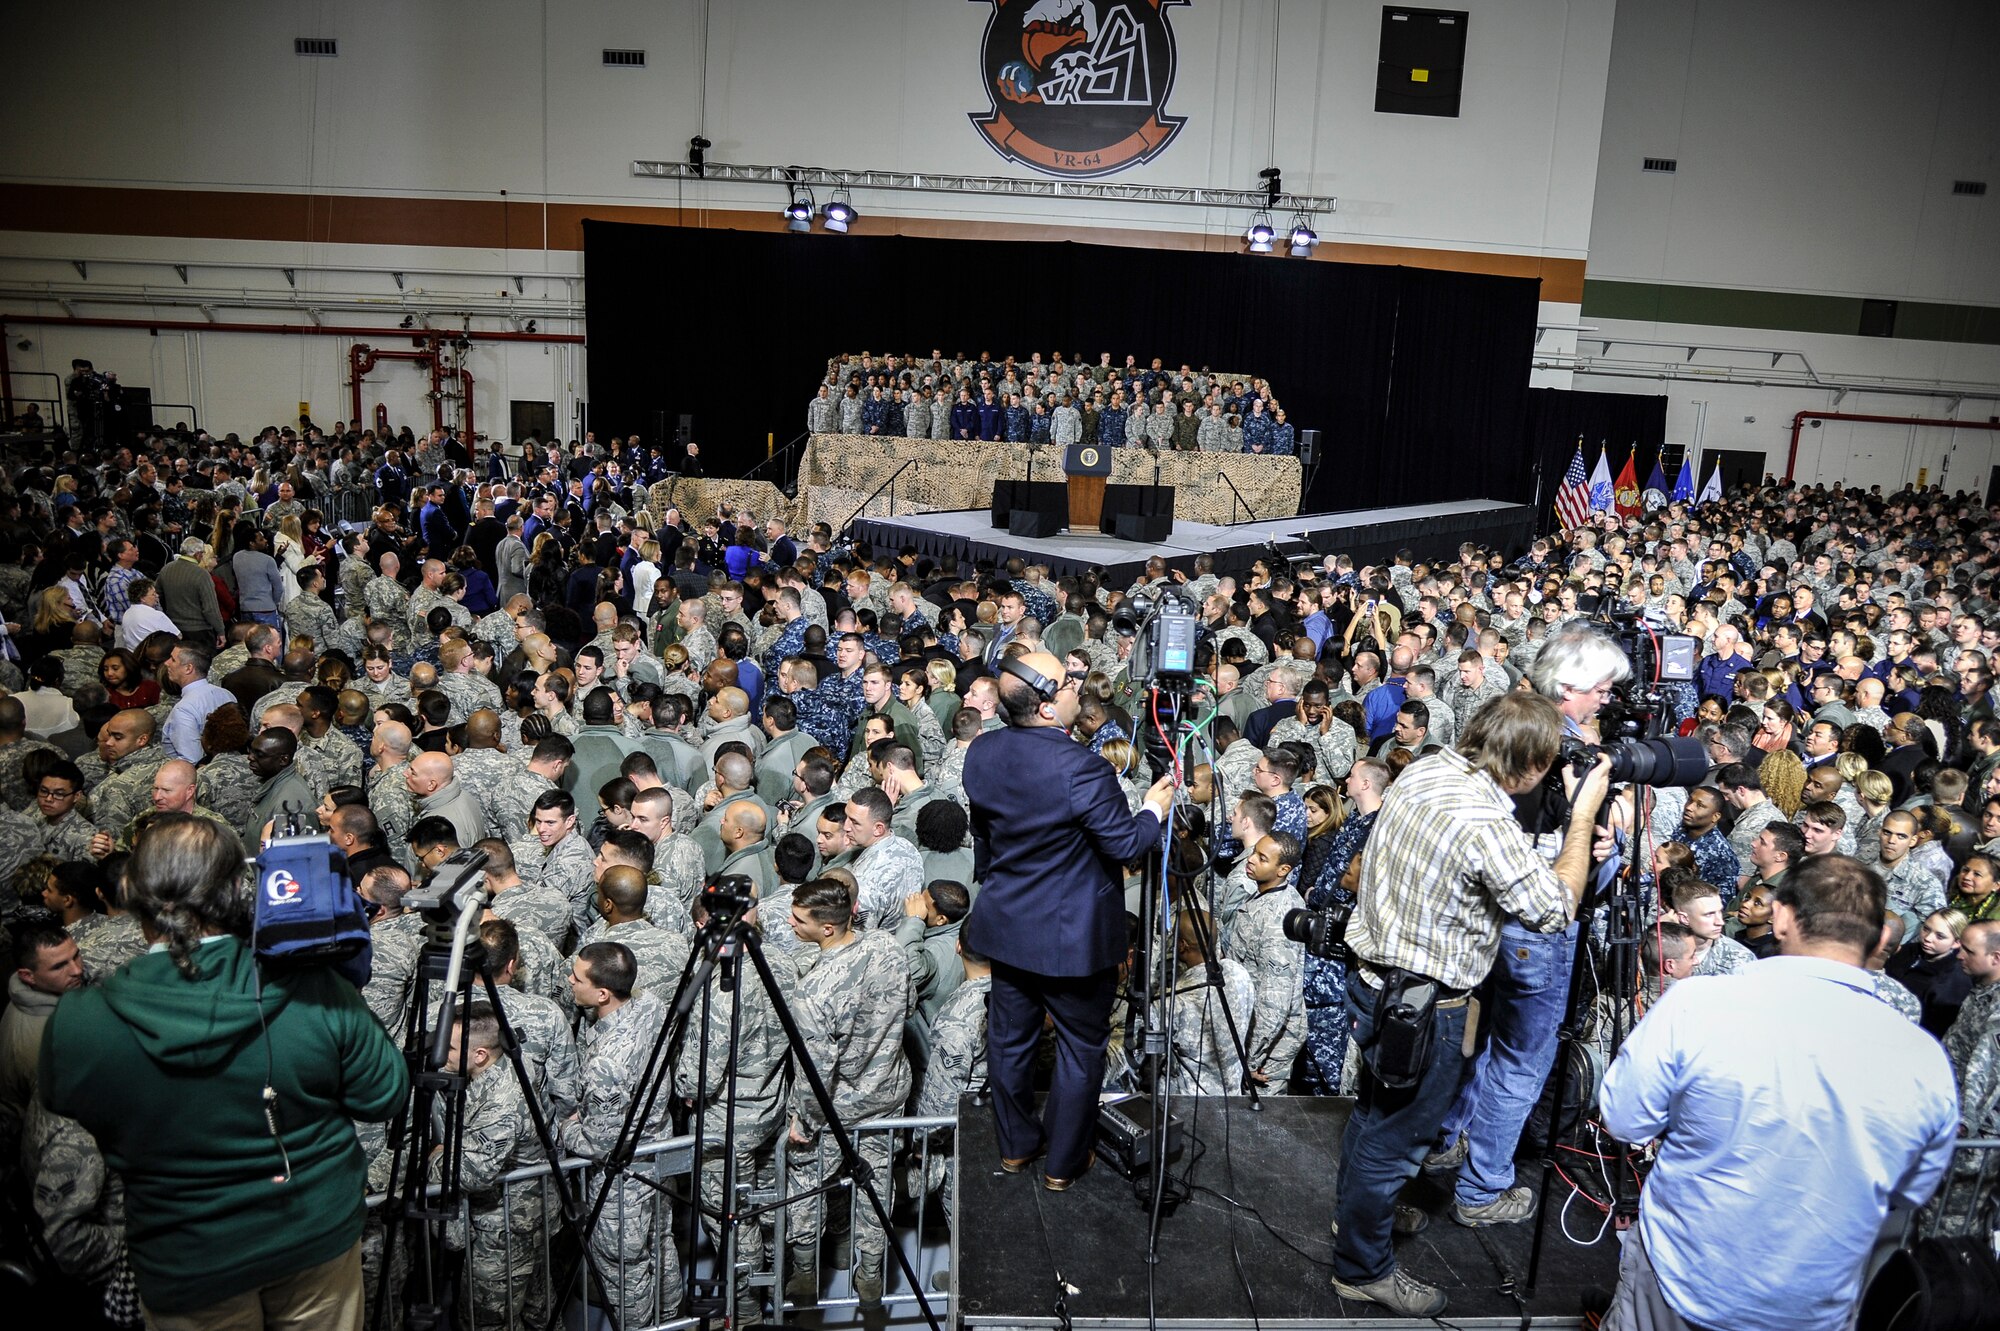 President Barack Obama addresses a crowd of service members and Defense Department civilians Dec. 15, 2014, at Joint Base McGuire-Dix-Lakehurst, N.J. The event allowed more than 3,000 military and civilian personnel to listen to their commander in chief discuss current conflicts and mission readiness, but more importantly thank the attendees for their service and dedication to their nation. (U.S. Air Force photo/Staff Sgt. Scott Saldukas)